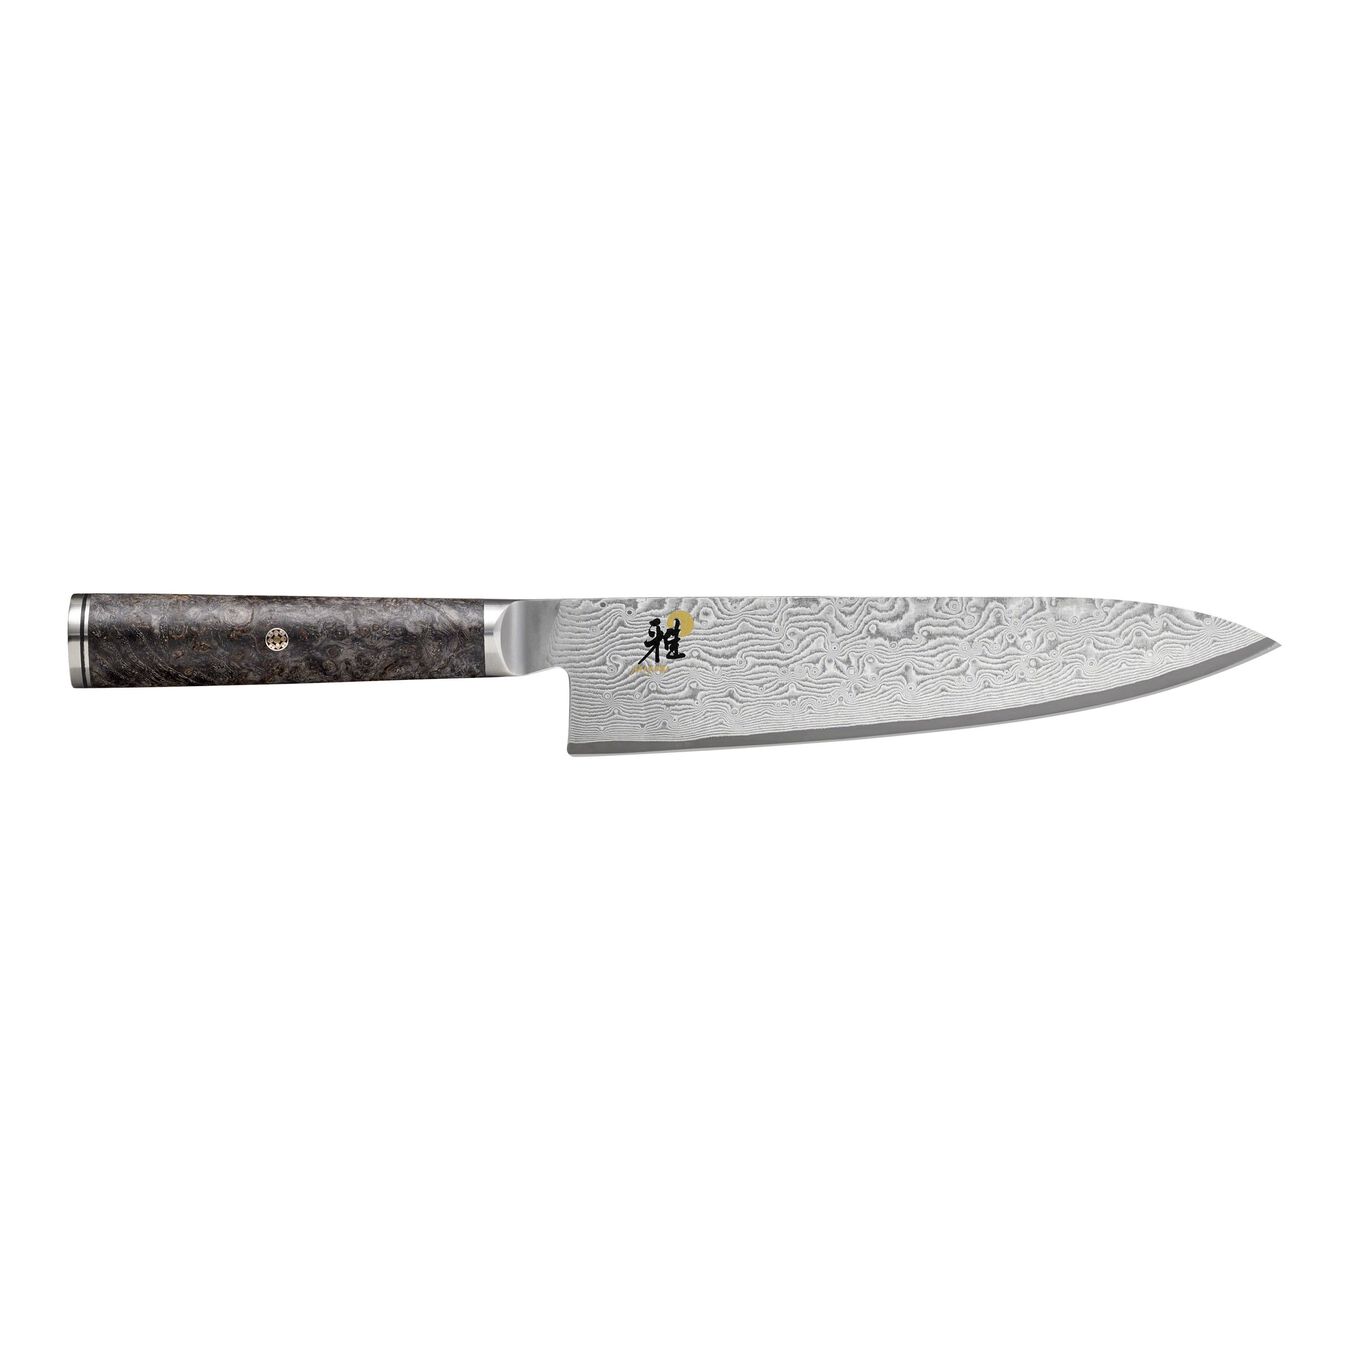 8-inch, Chef's Knife,,large 1